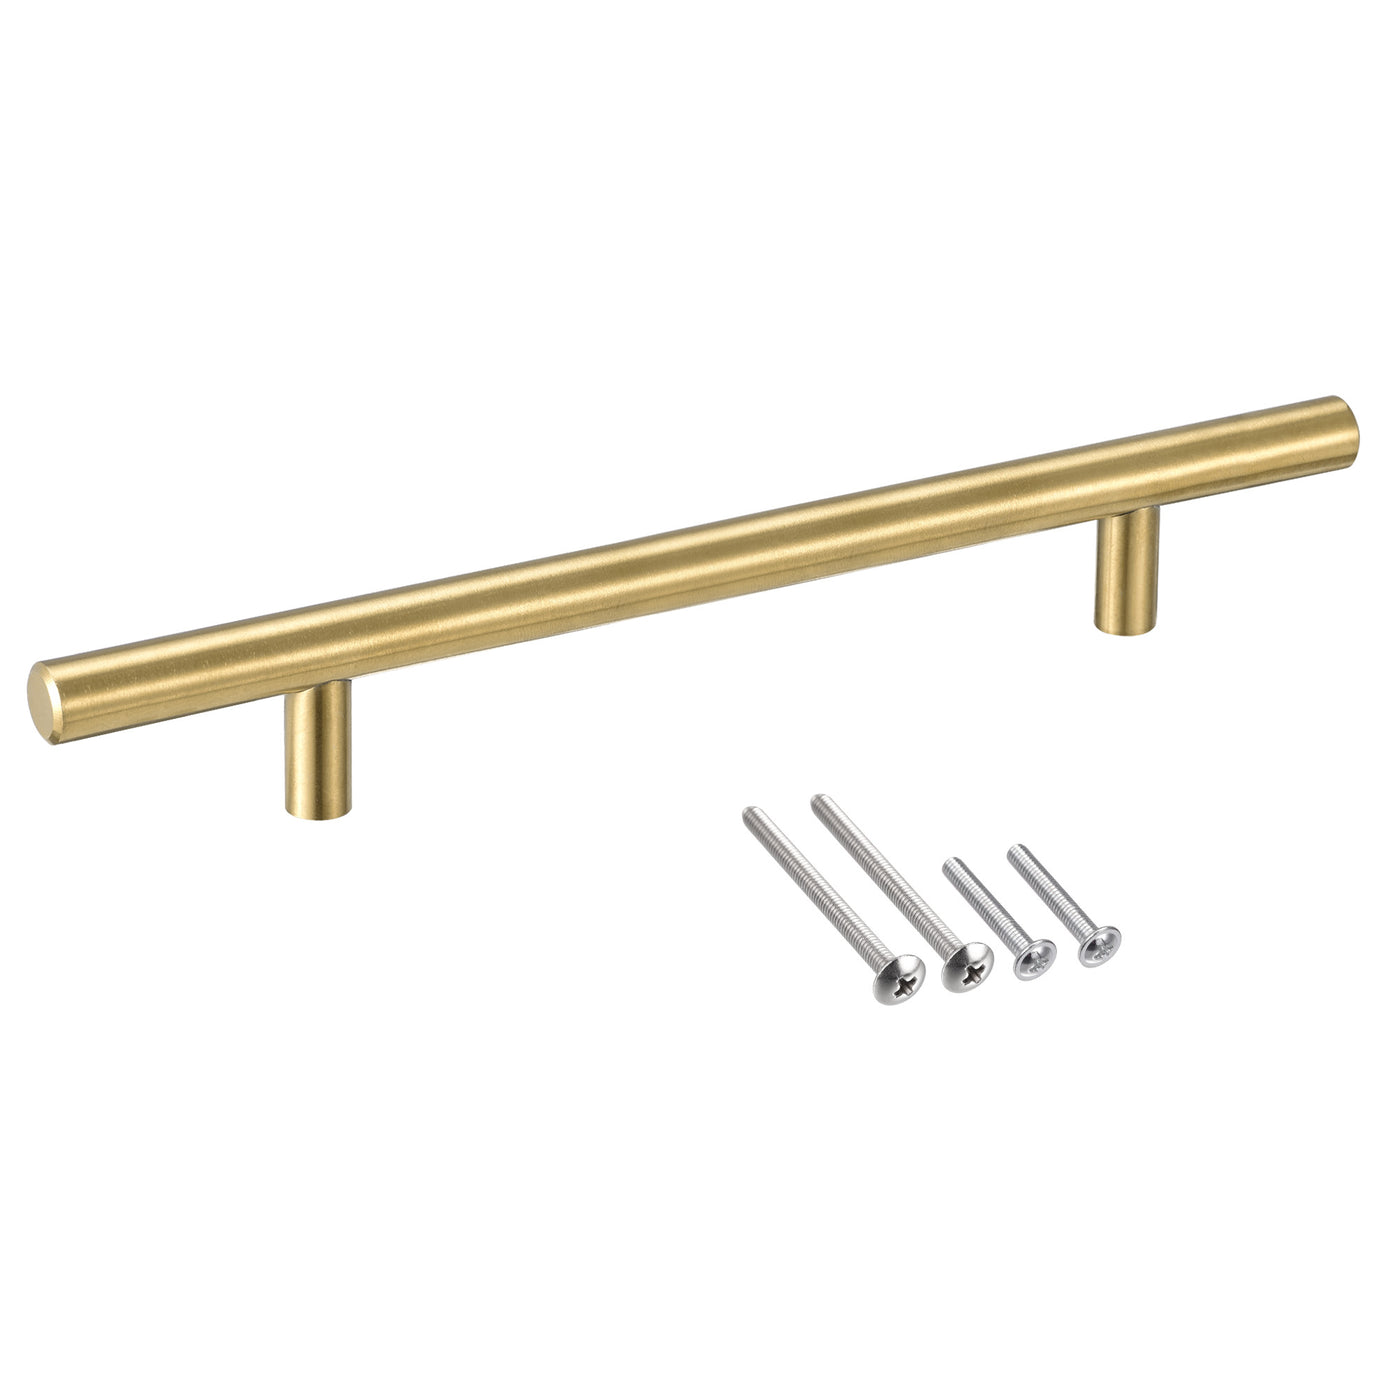 uxcell Uxcell T Bar Pull Handle, 10"(250mm) Length 12mm Dia Stainless Steel Cabinet Pulls 6.3"(160mm) Hole Center Distance Gold Tone 2pcs